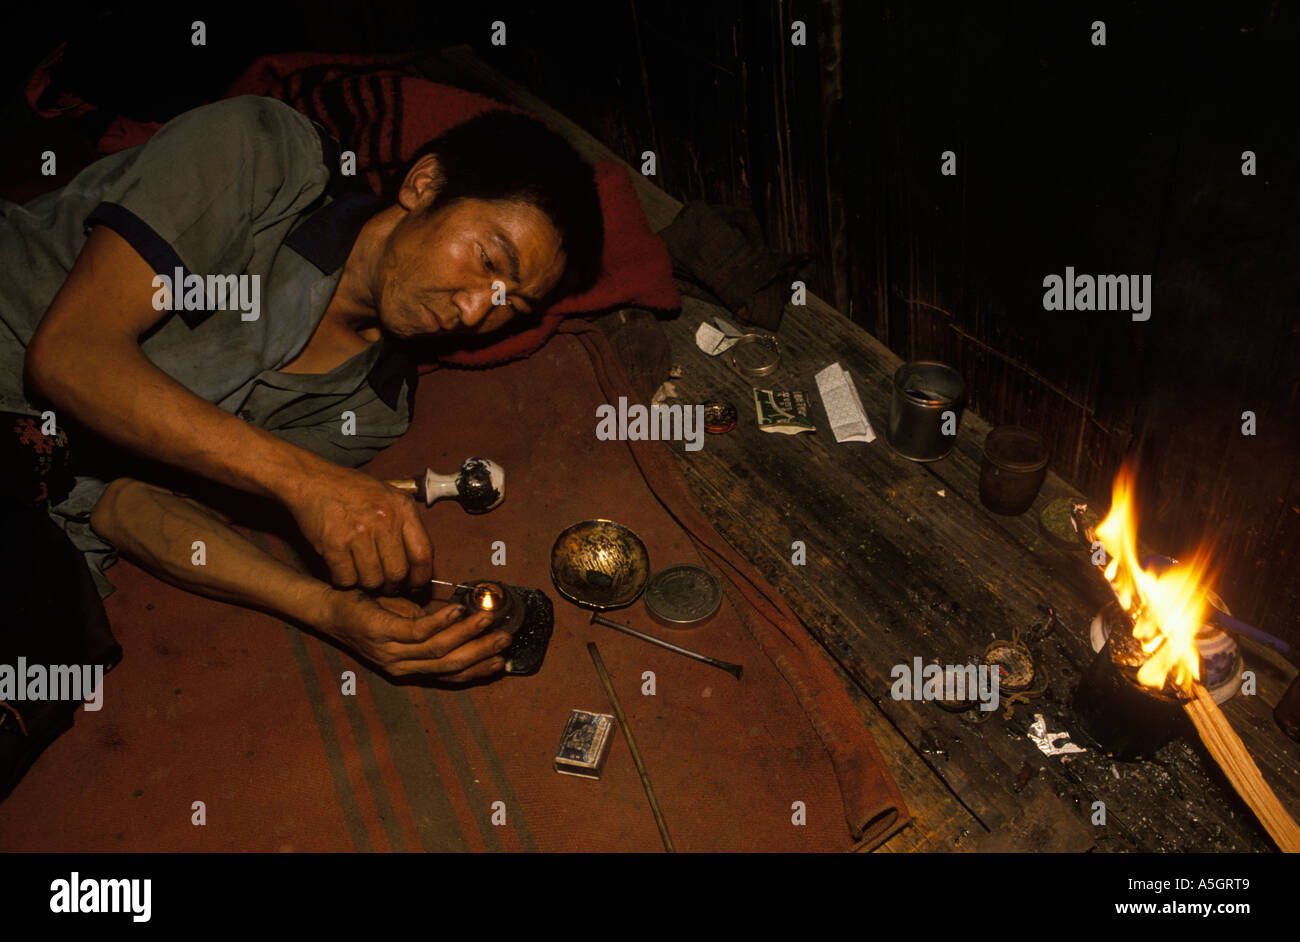 Opium addict, Drug  addiction tribesman Northern Thailand. South East Asia Chiang Rai province, 1990s 90s HOMER SYKES Stock Photo